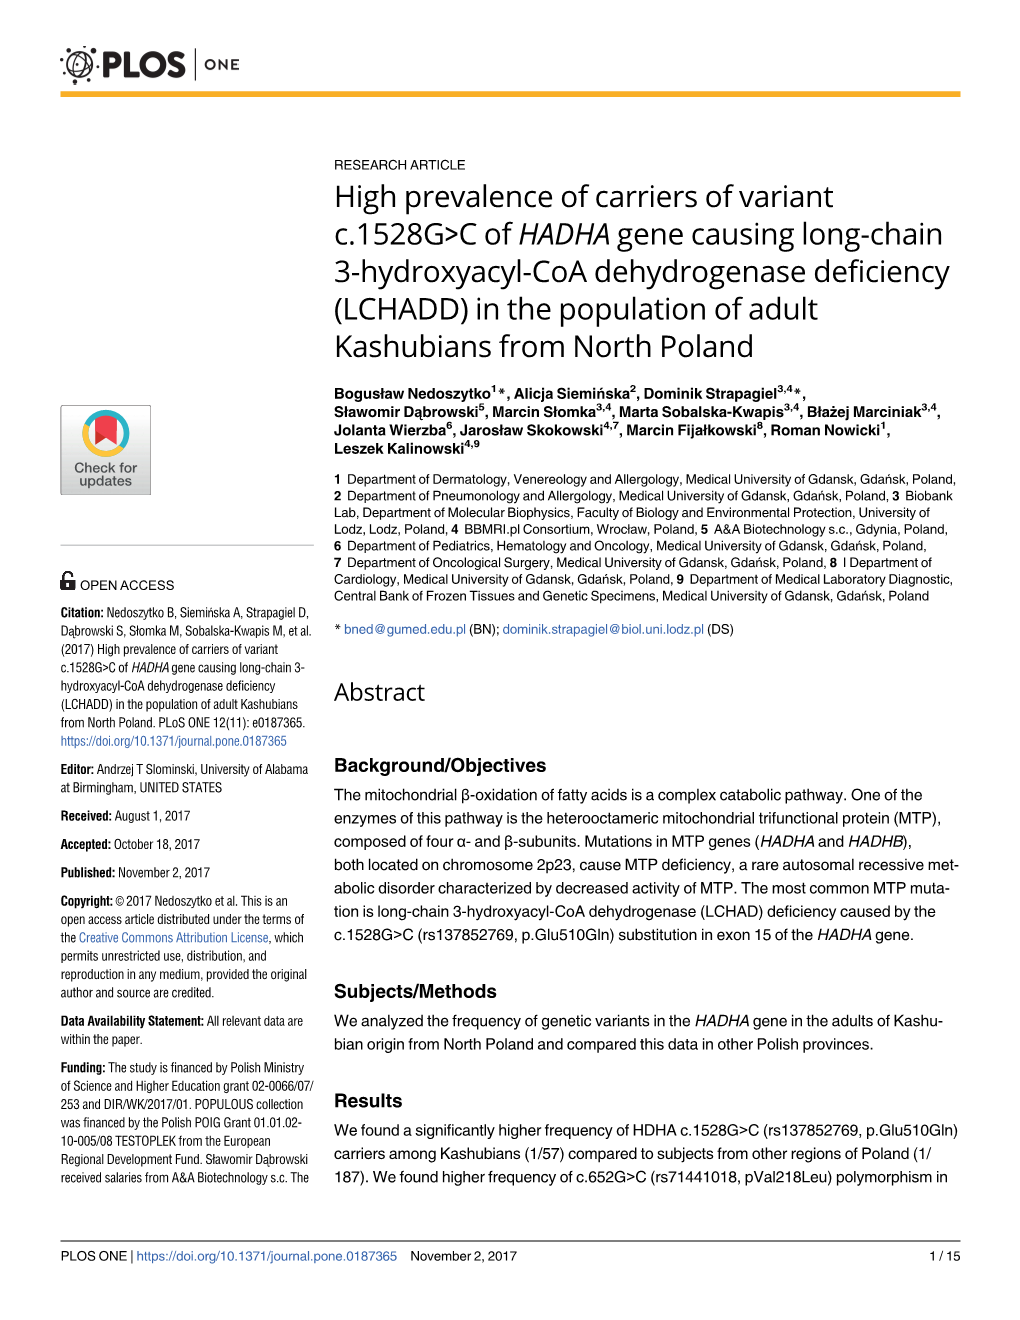 C of HADHA Gene Causing Long-Chain 3-Hydroxyacyl-Coa Dehydrogenase Deficiency (LCHADD) in the Population of Adult Kashubians from North Poland